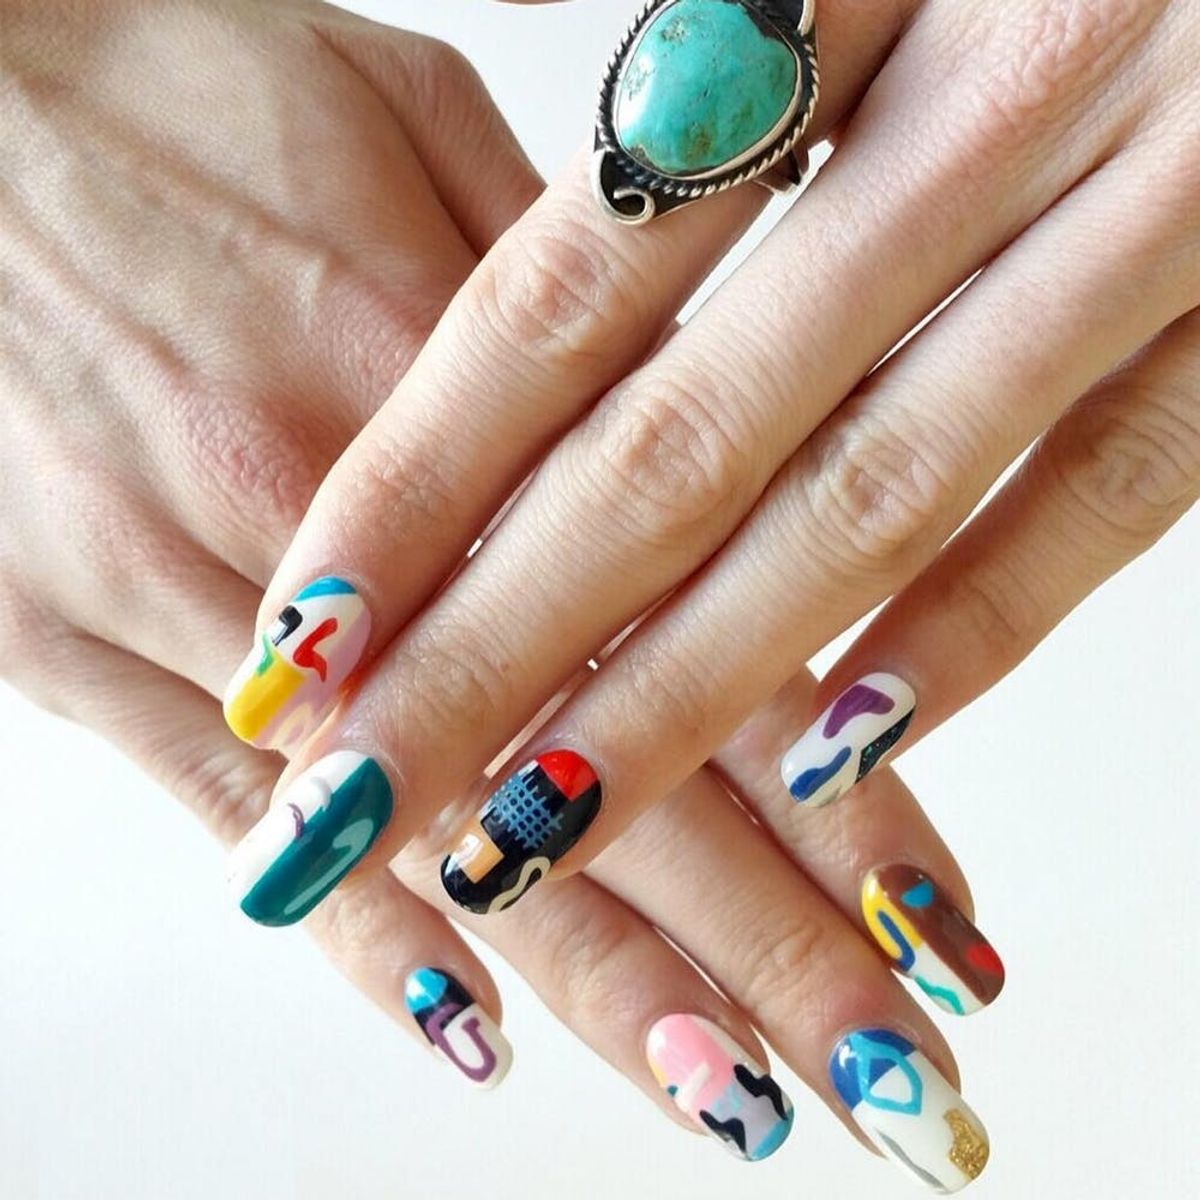 29 Next-Level Manicures to Step Up Your #OOTD Game